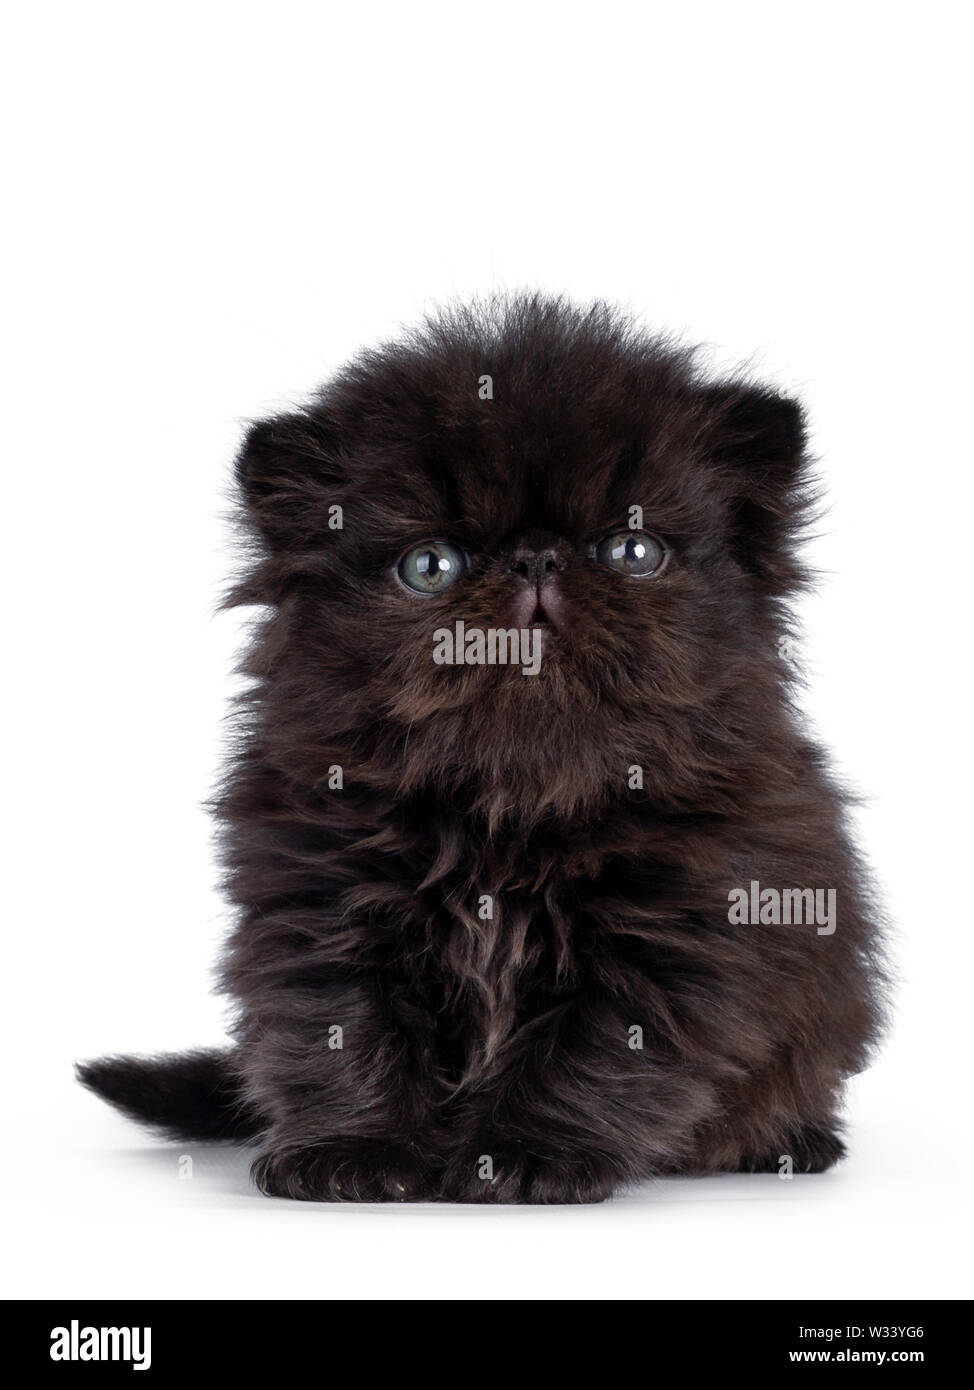 Cute 4 weeks old black Persian kitten, sitting straight up. Looking above camera with greenish blue eyes. Isolated on white background. Stock Photo